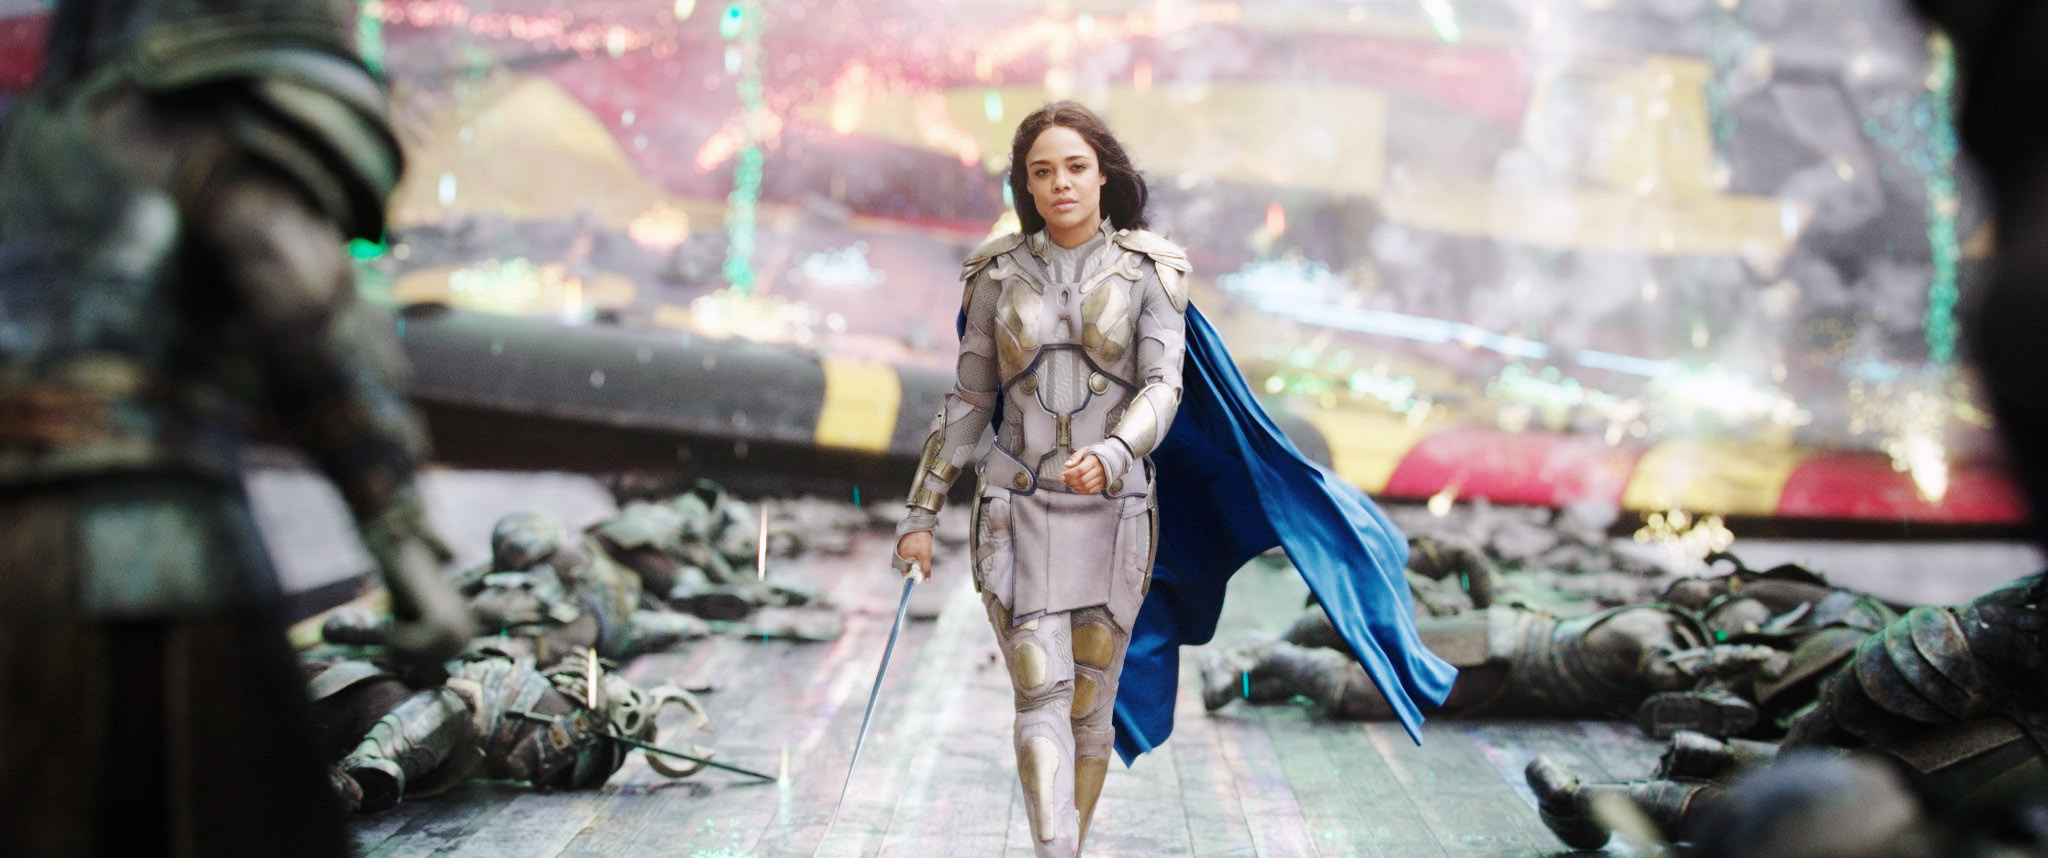 Valkyrie walks away from the wreckage triumphantly